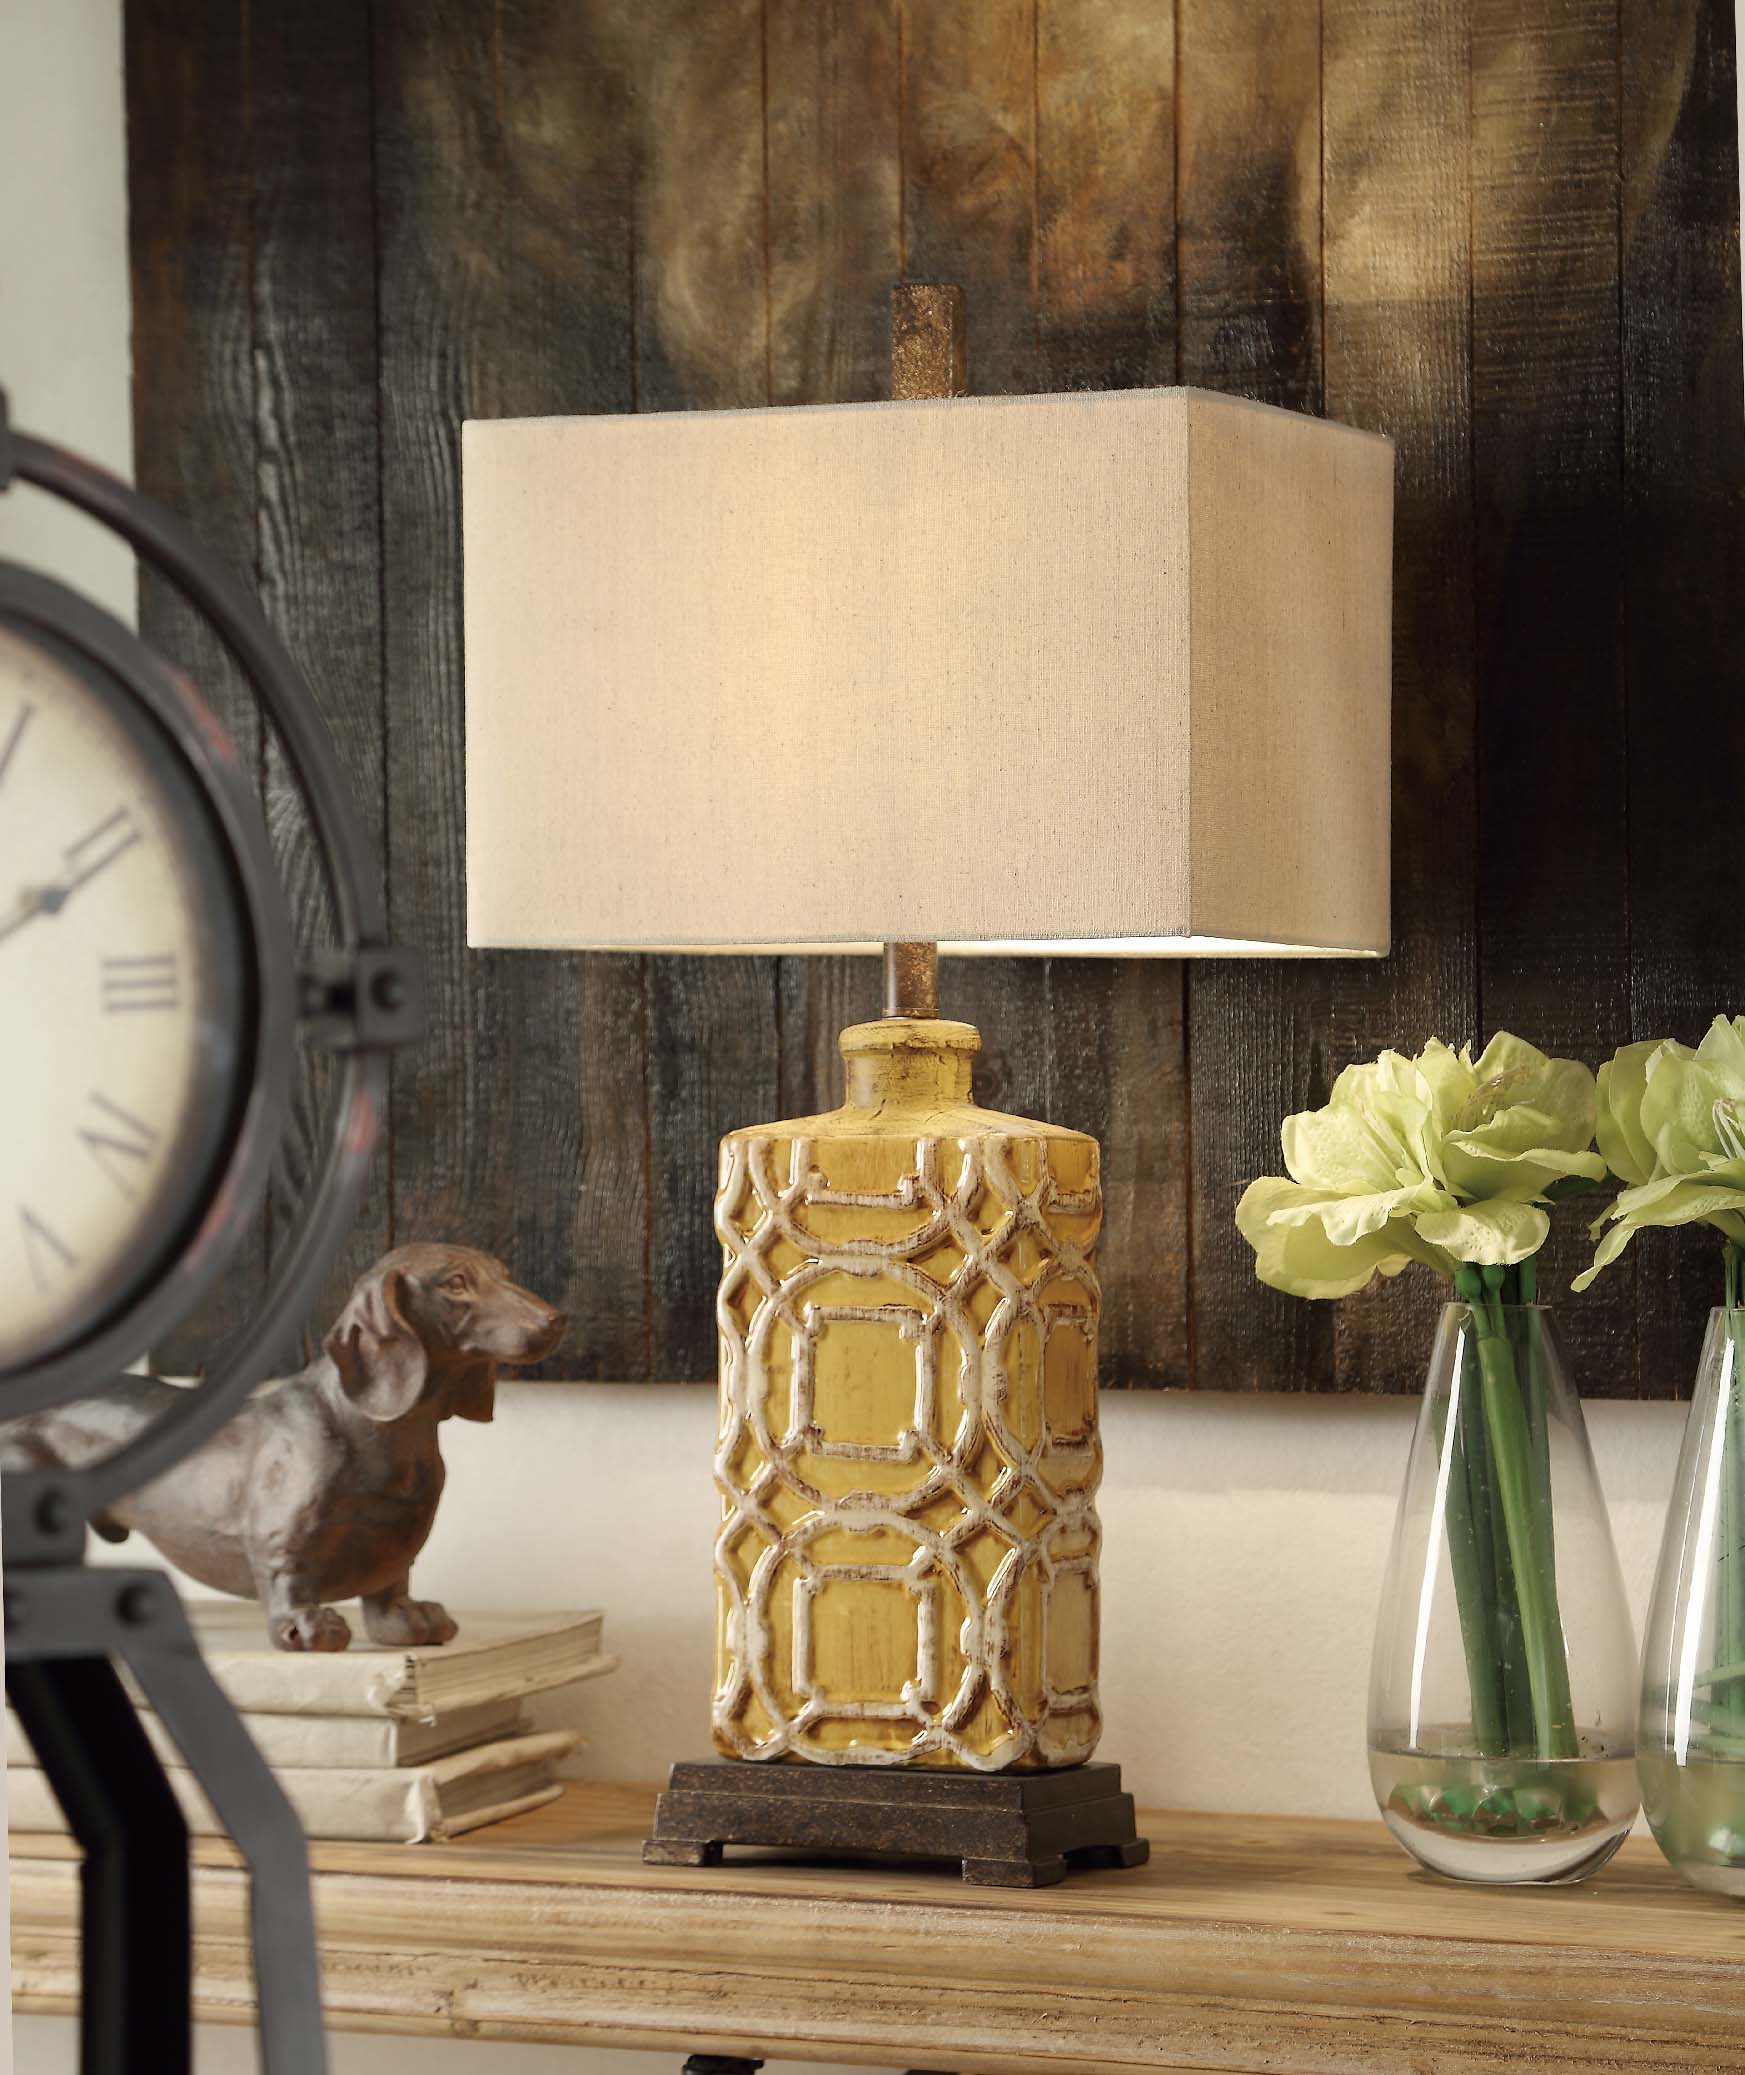 Chatham 28.5-Inch Table Lamp, Antique Yellow - image 1 of 2